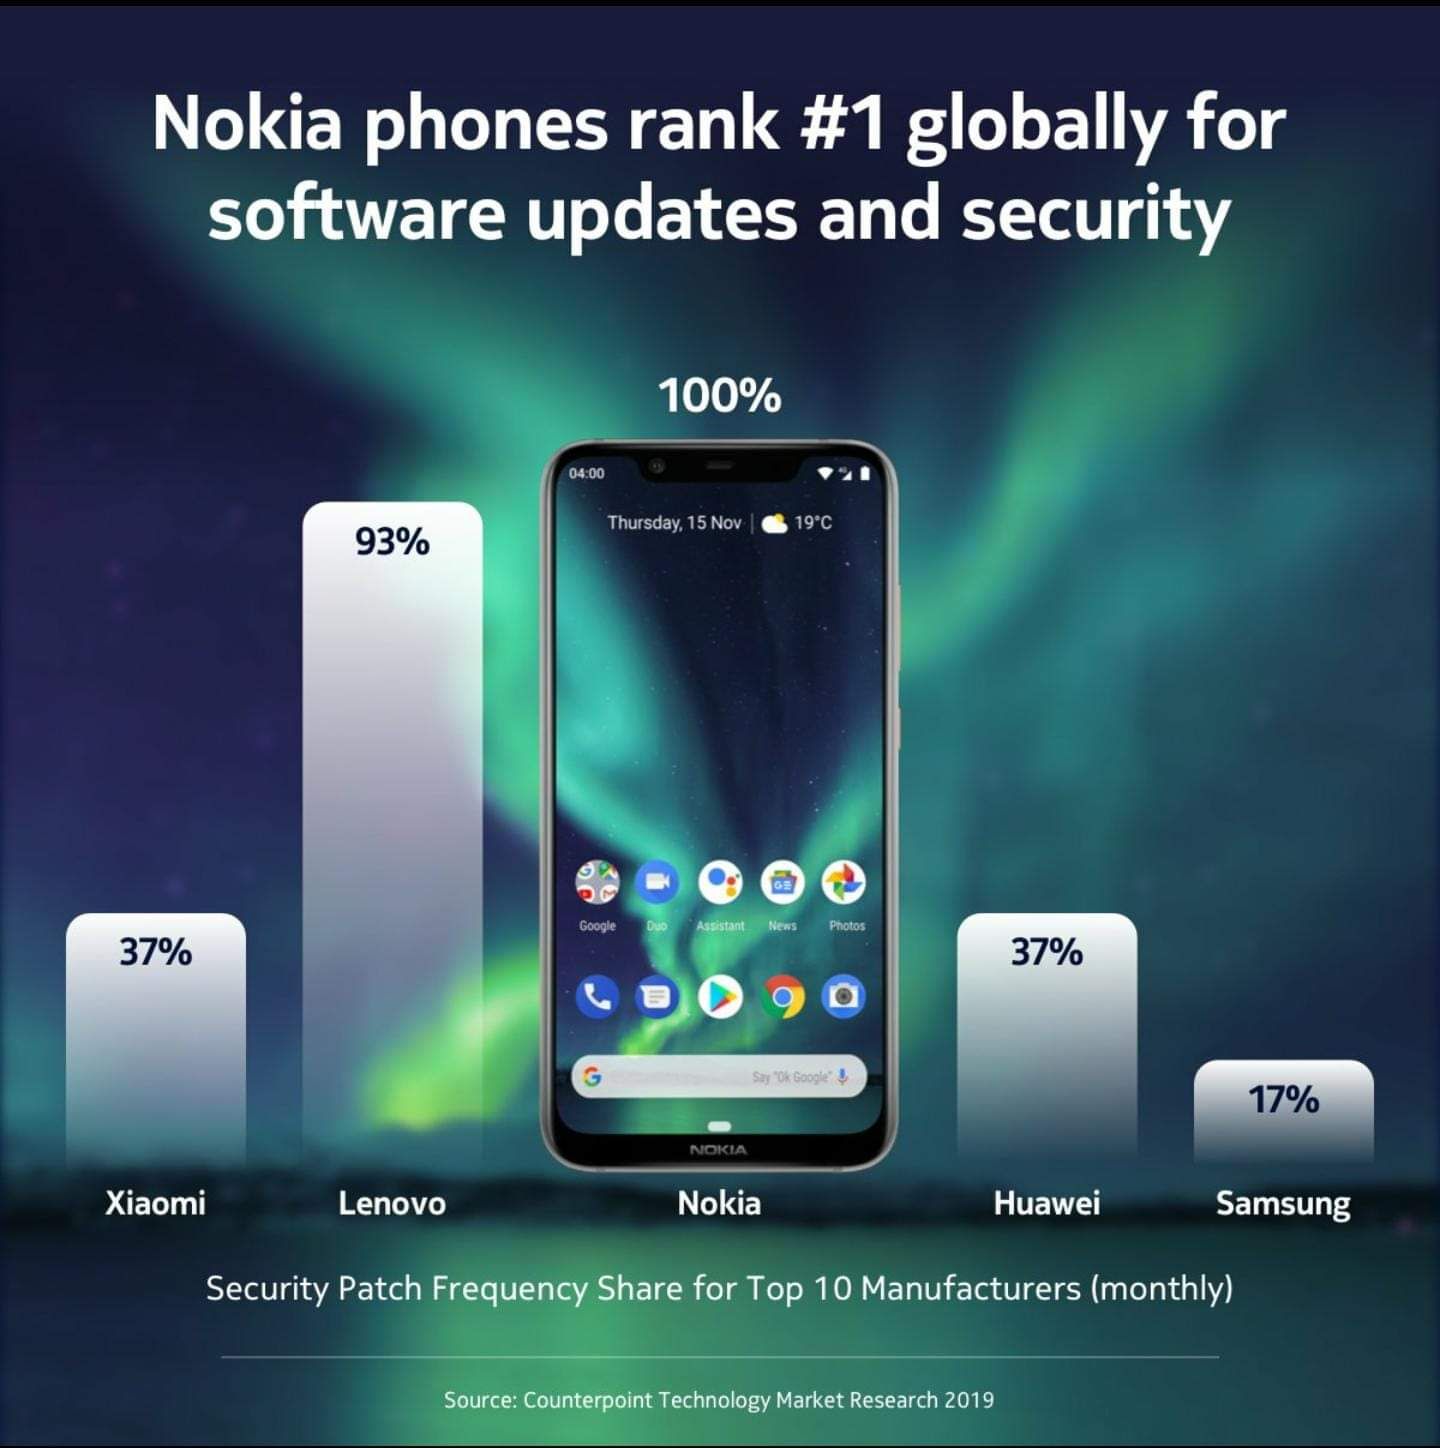 Nokia take the lead in software updates